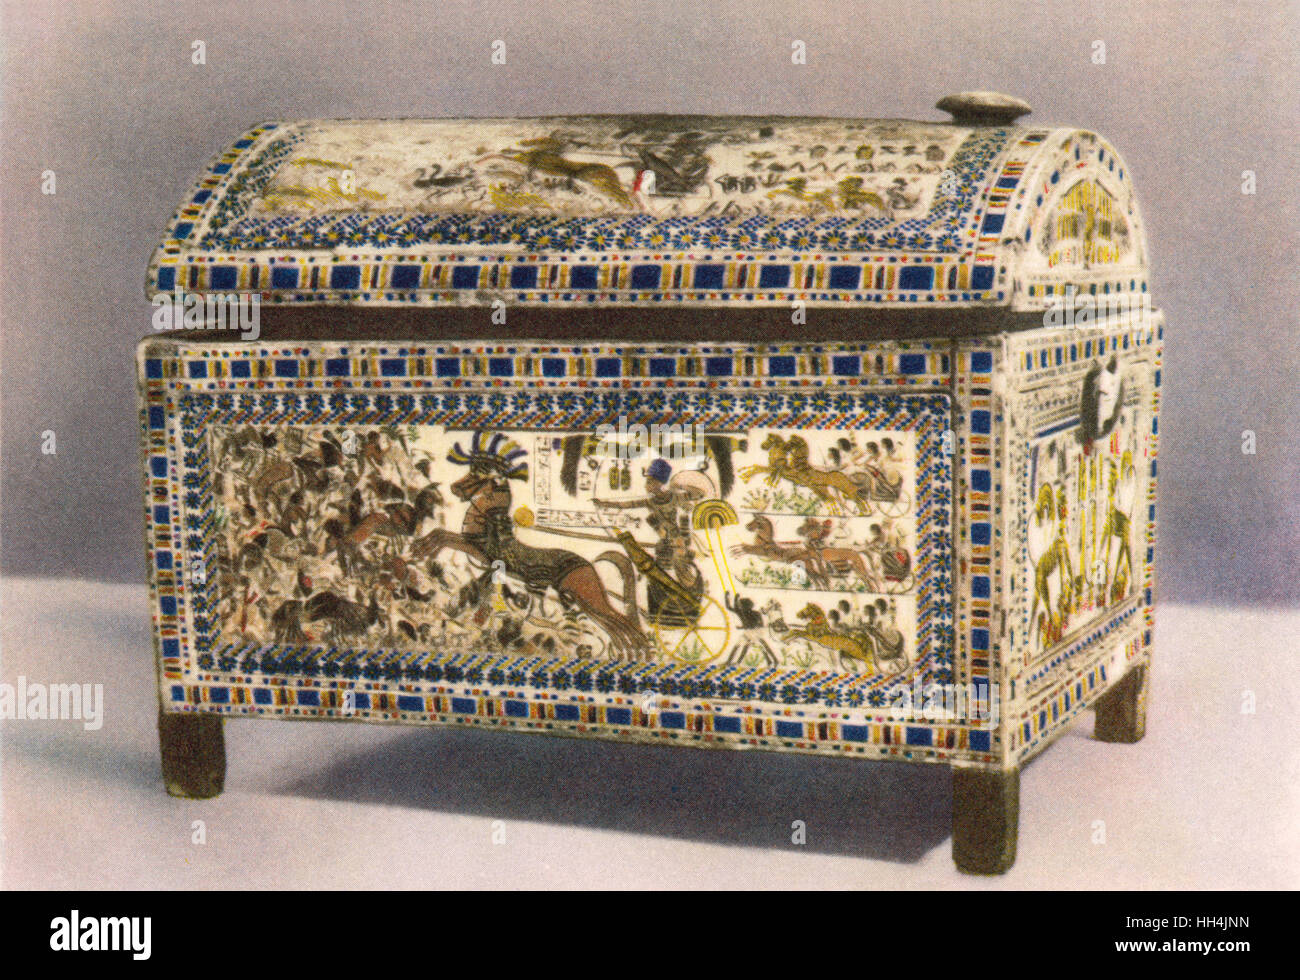 Painted wooden chest from Tutankhamun's tomb Stock Photo